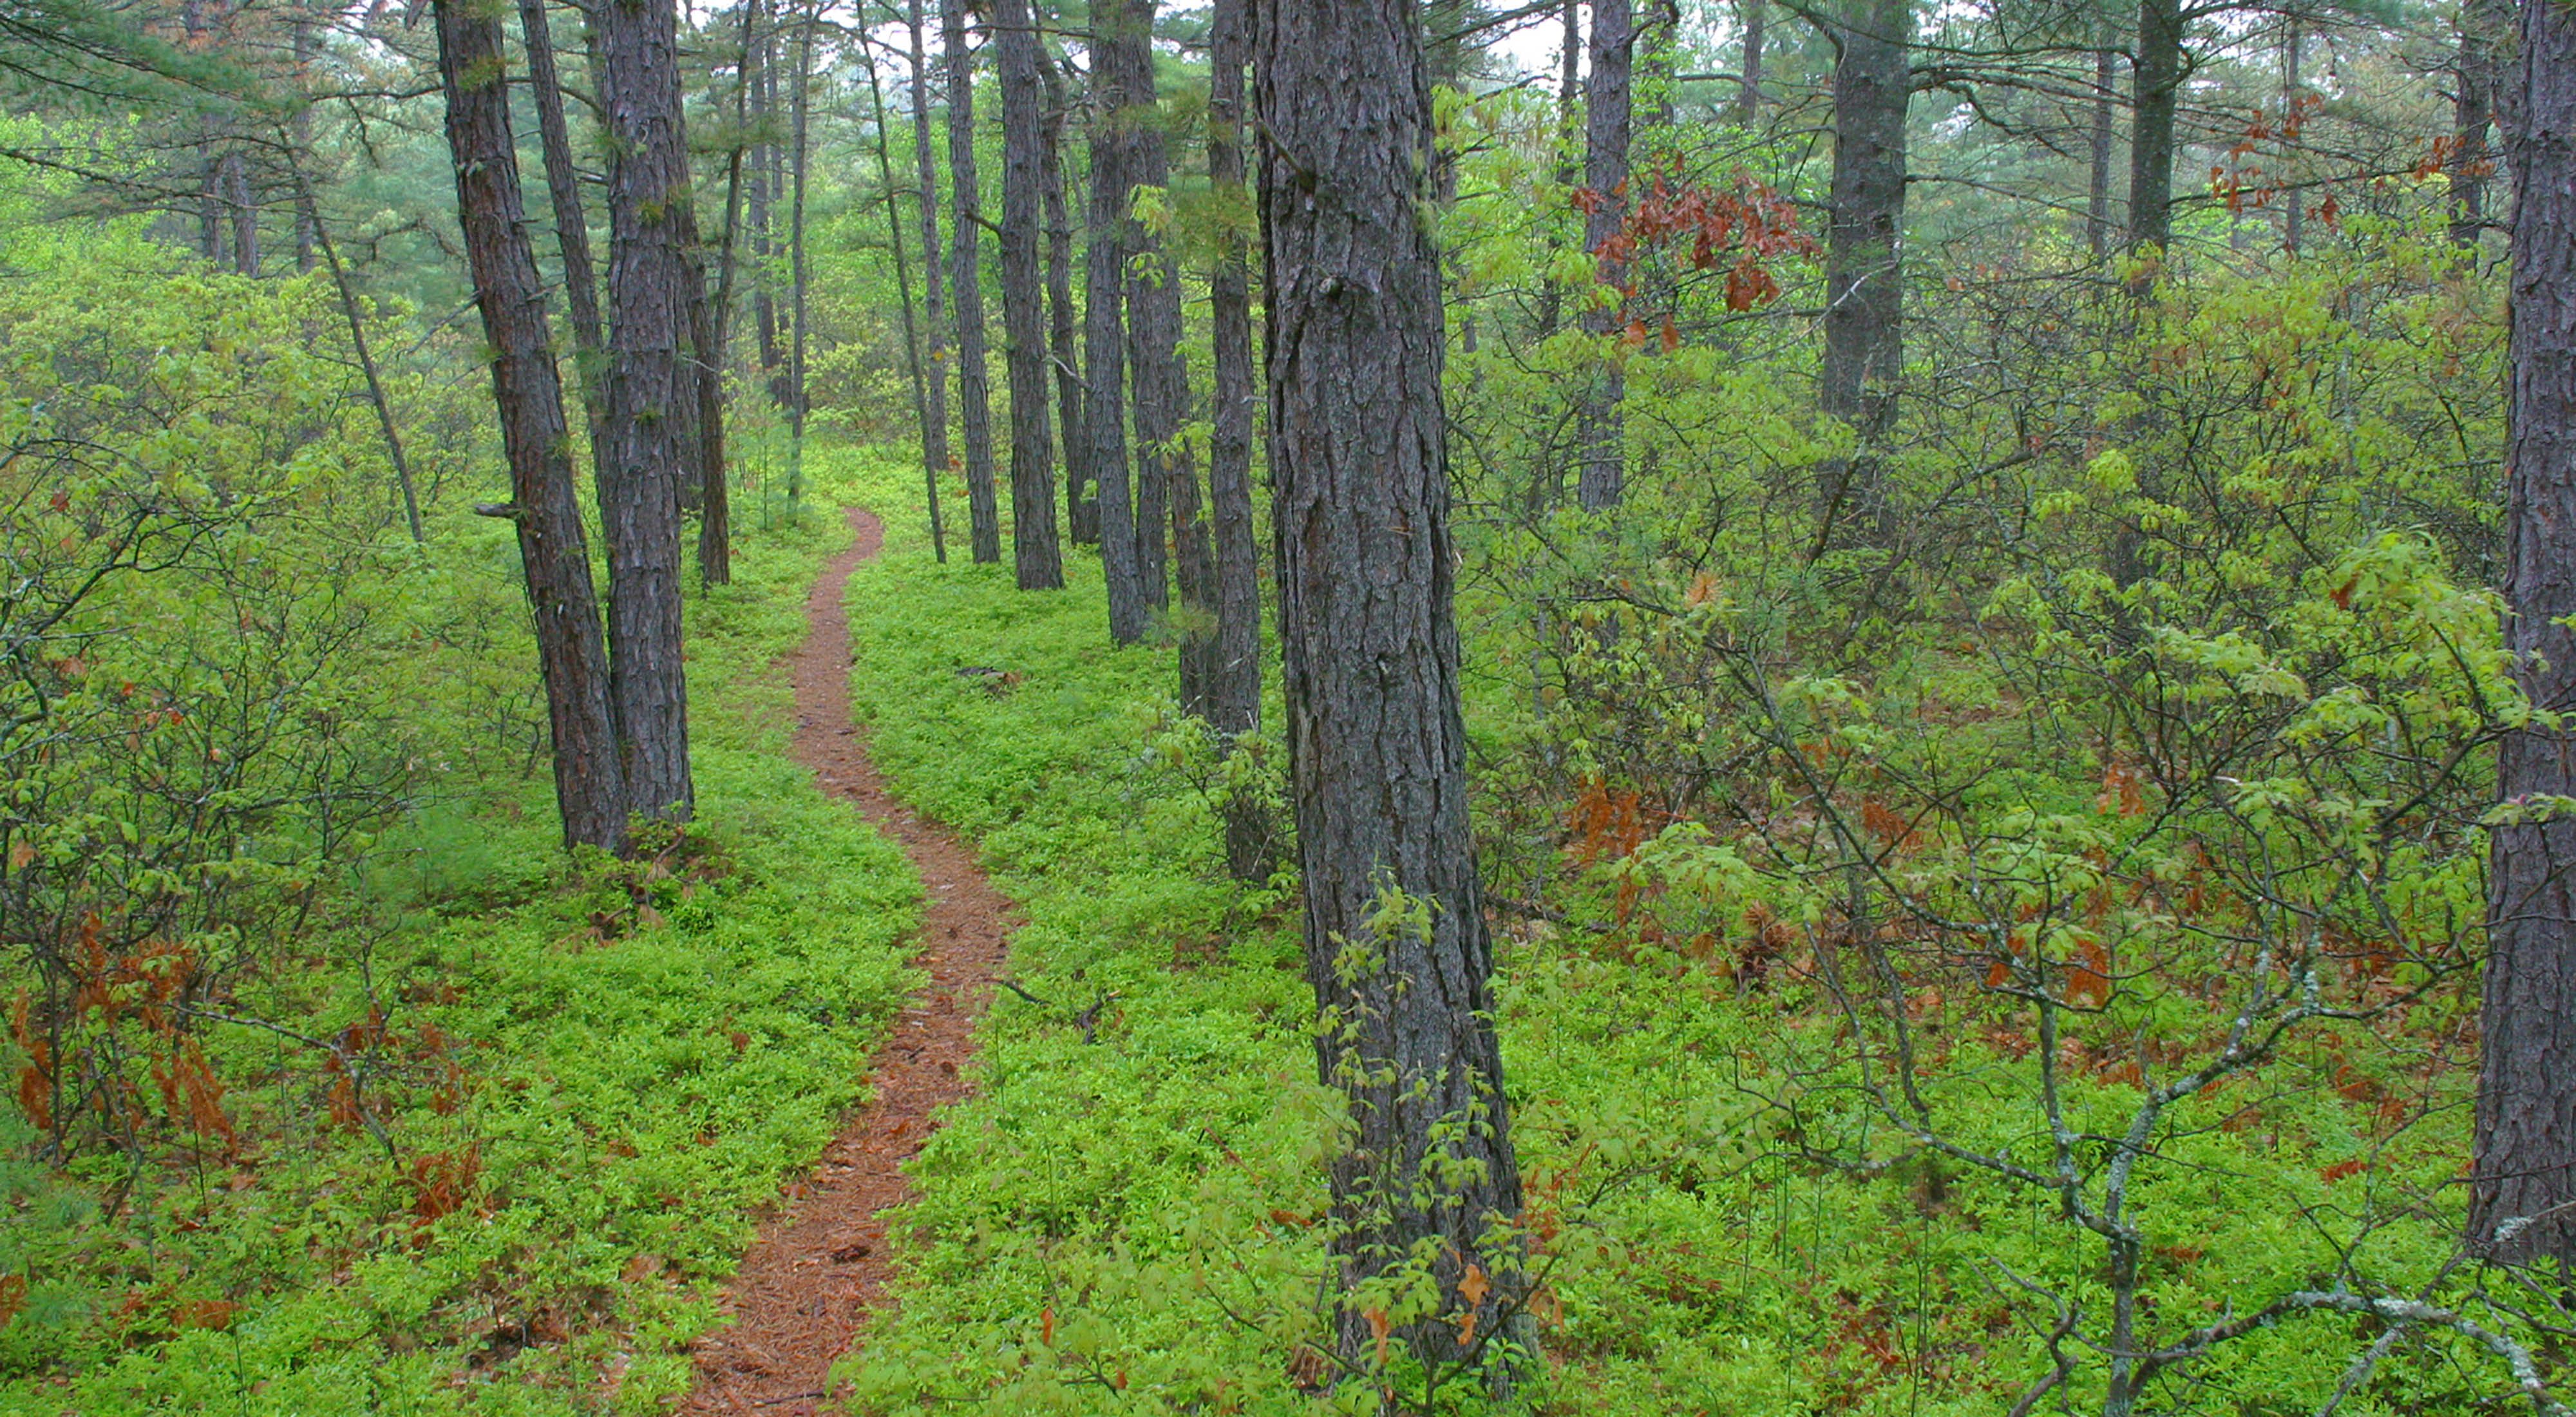 A trail winds between pine trees and through bright green undergrowth.